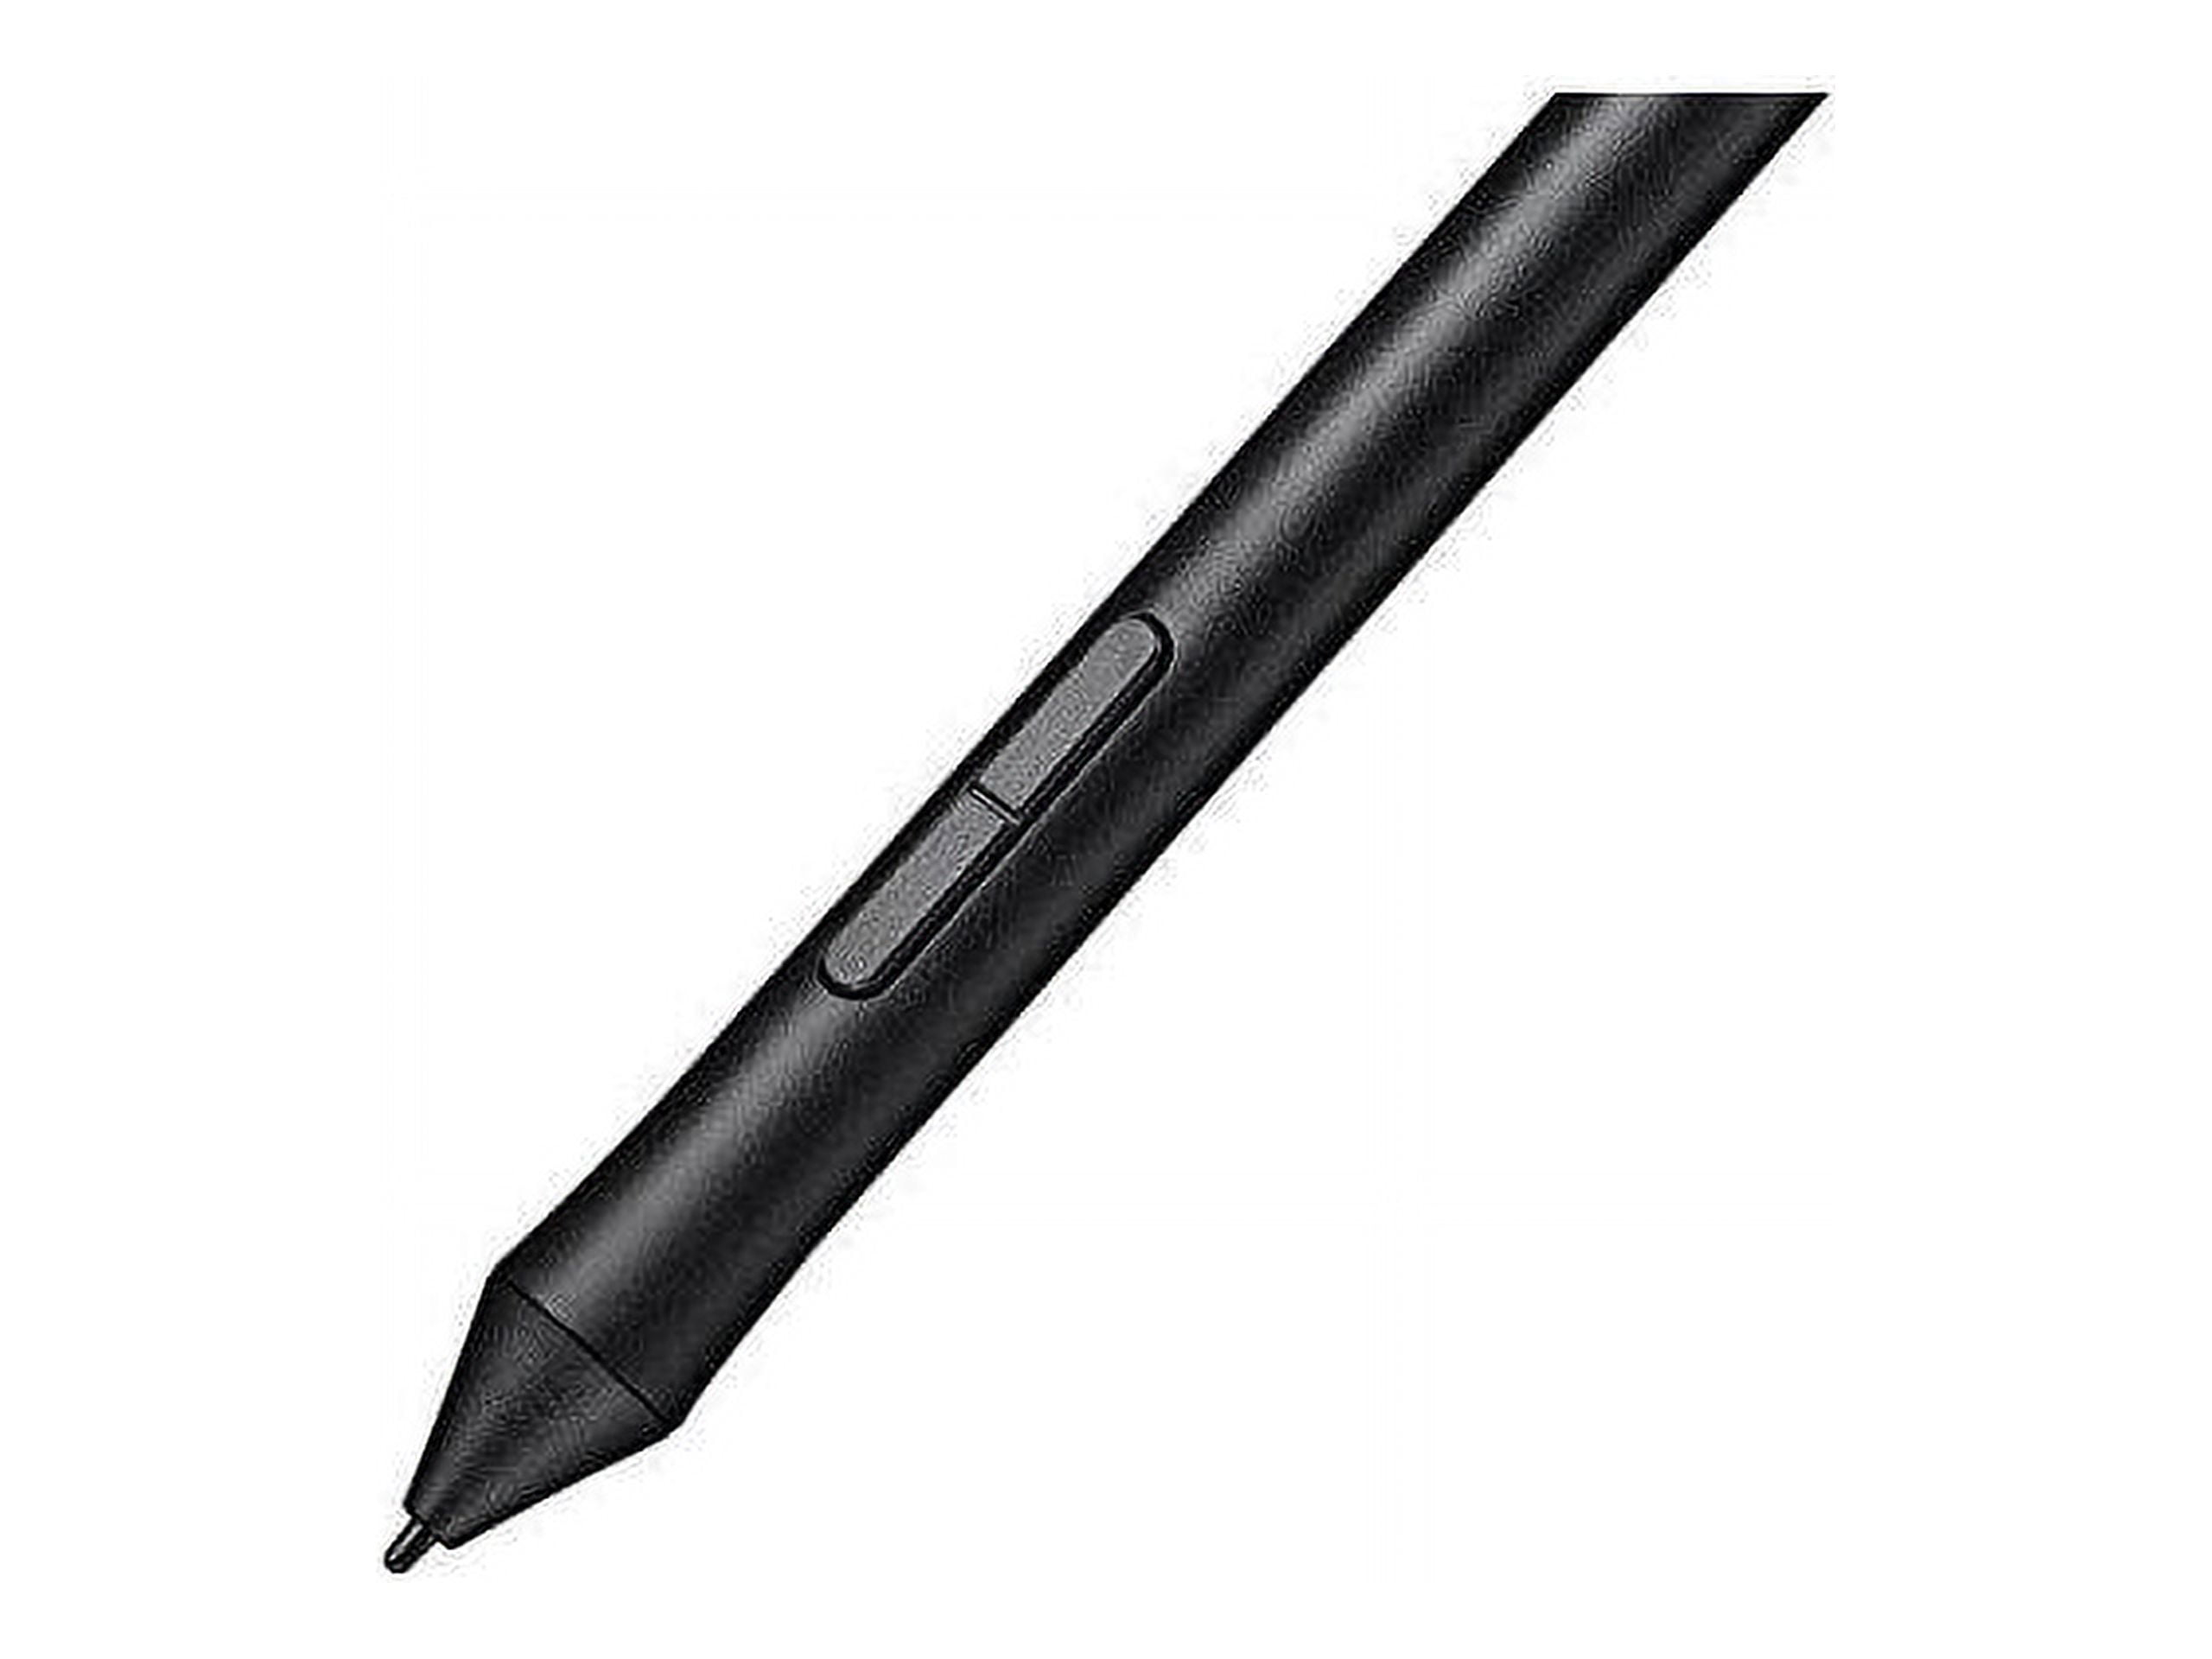 Modern replacements for old Wacom tablet pens ⌘I Get Info